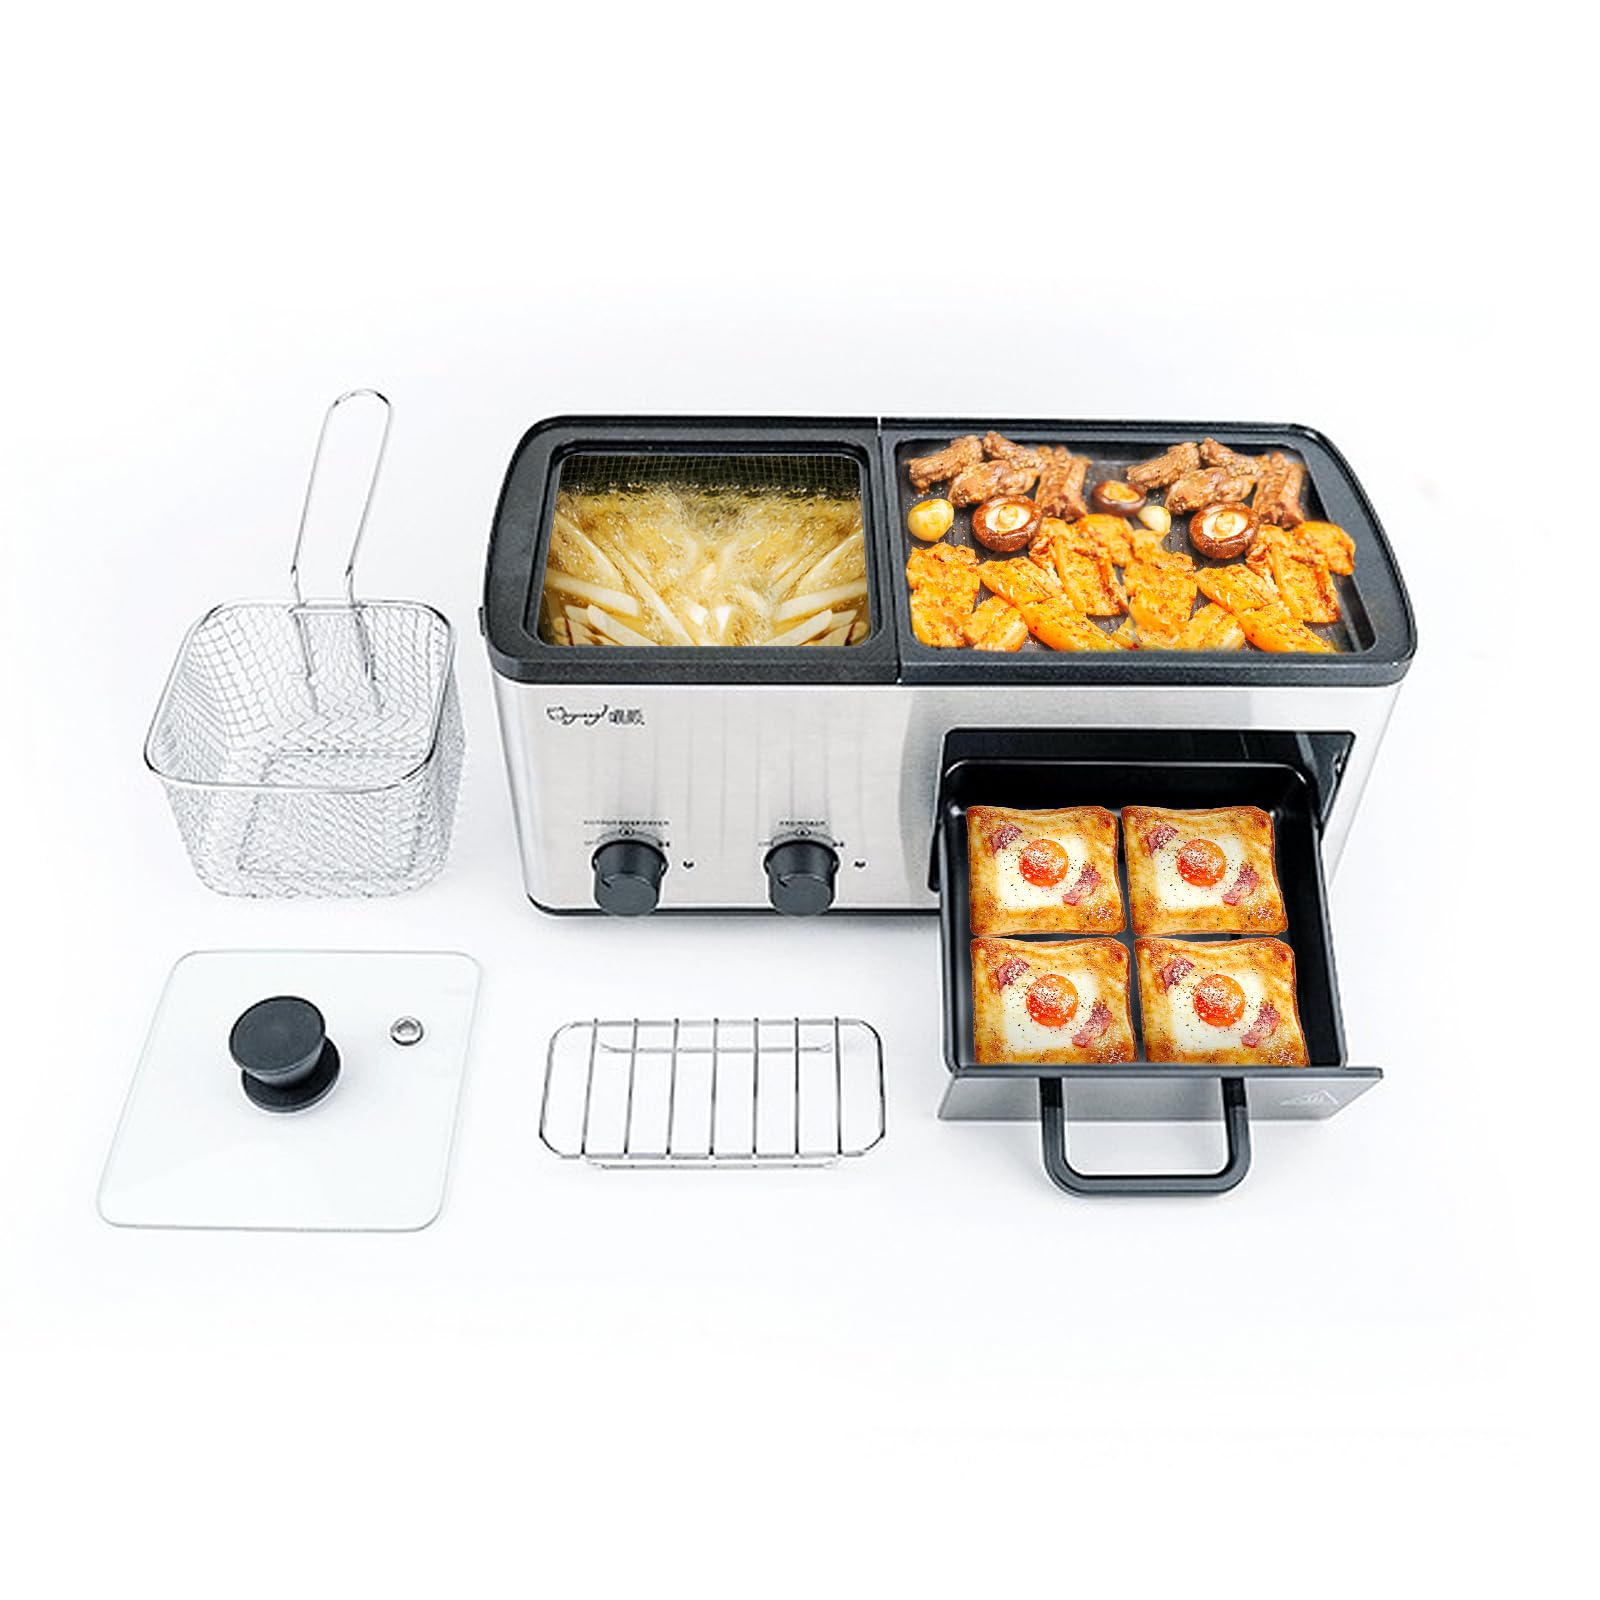 4 in 1 Hot Pot Electric with Grill and Frying Basket, Non-Stick Multi-Cooker with Independent Dual Temperature Control and Fast Heating for Korean BBQ, Simmer, Boil, Fry, Roast, Silver